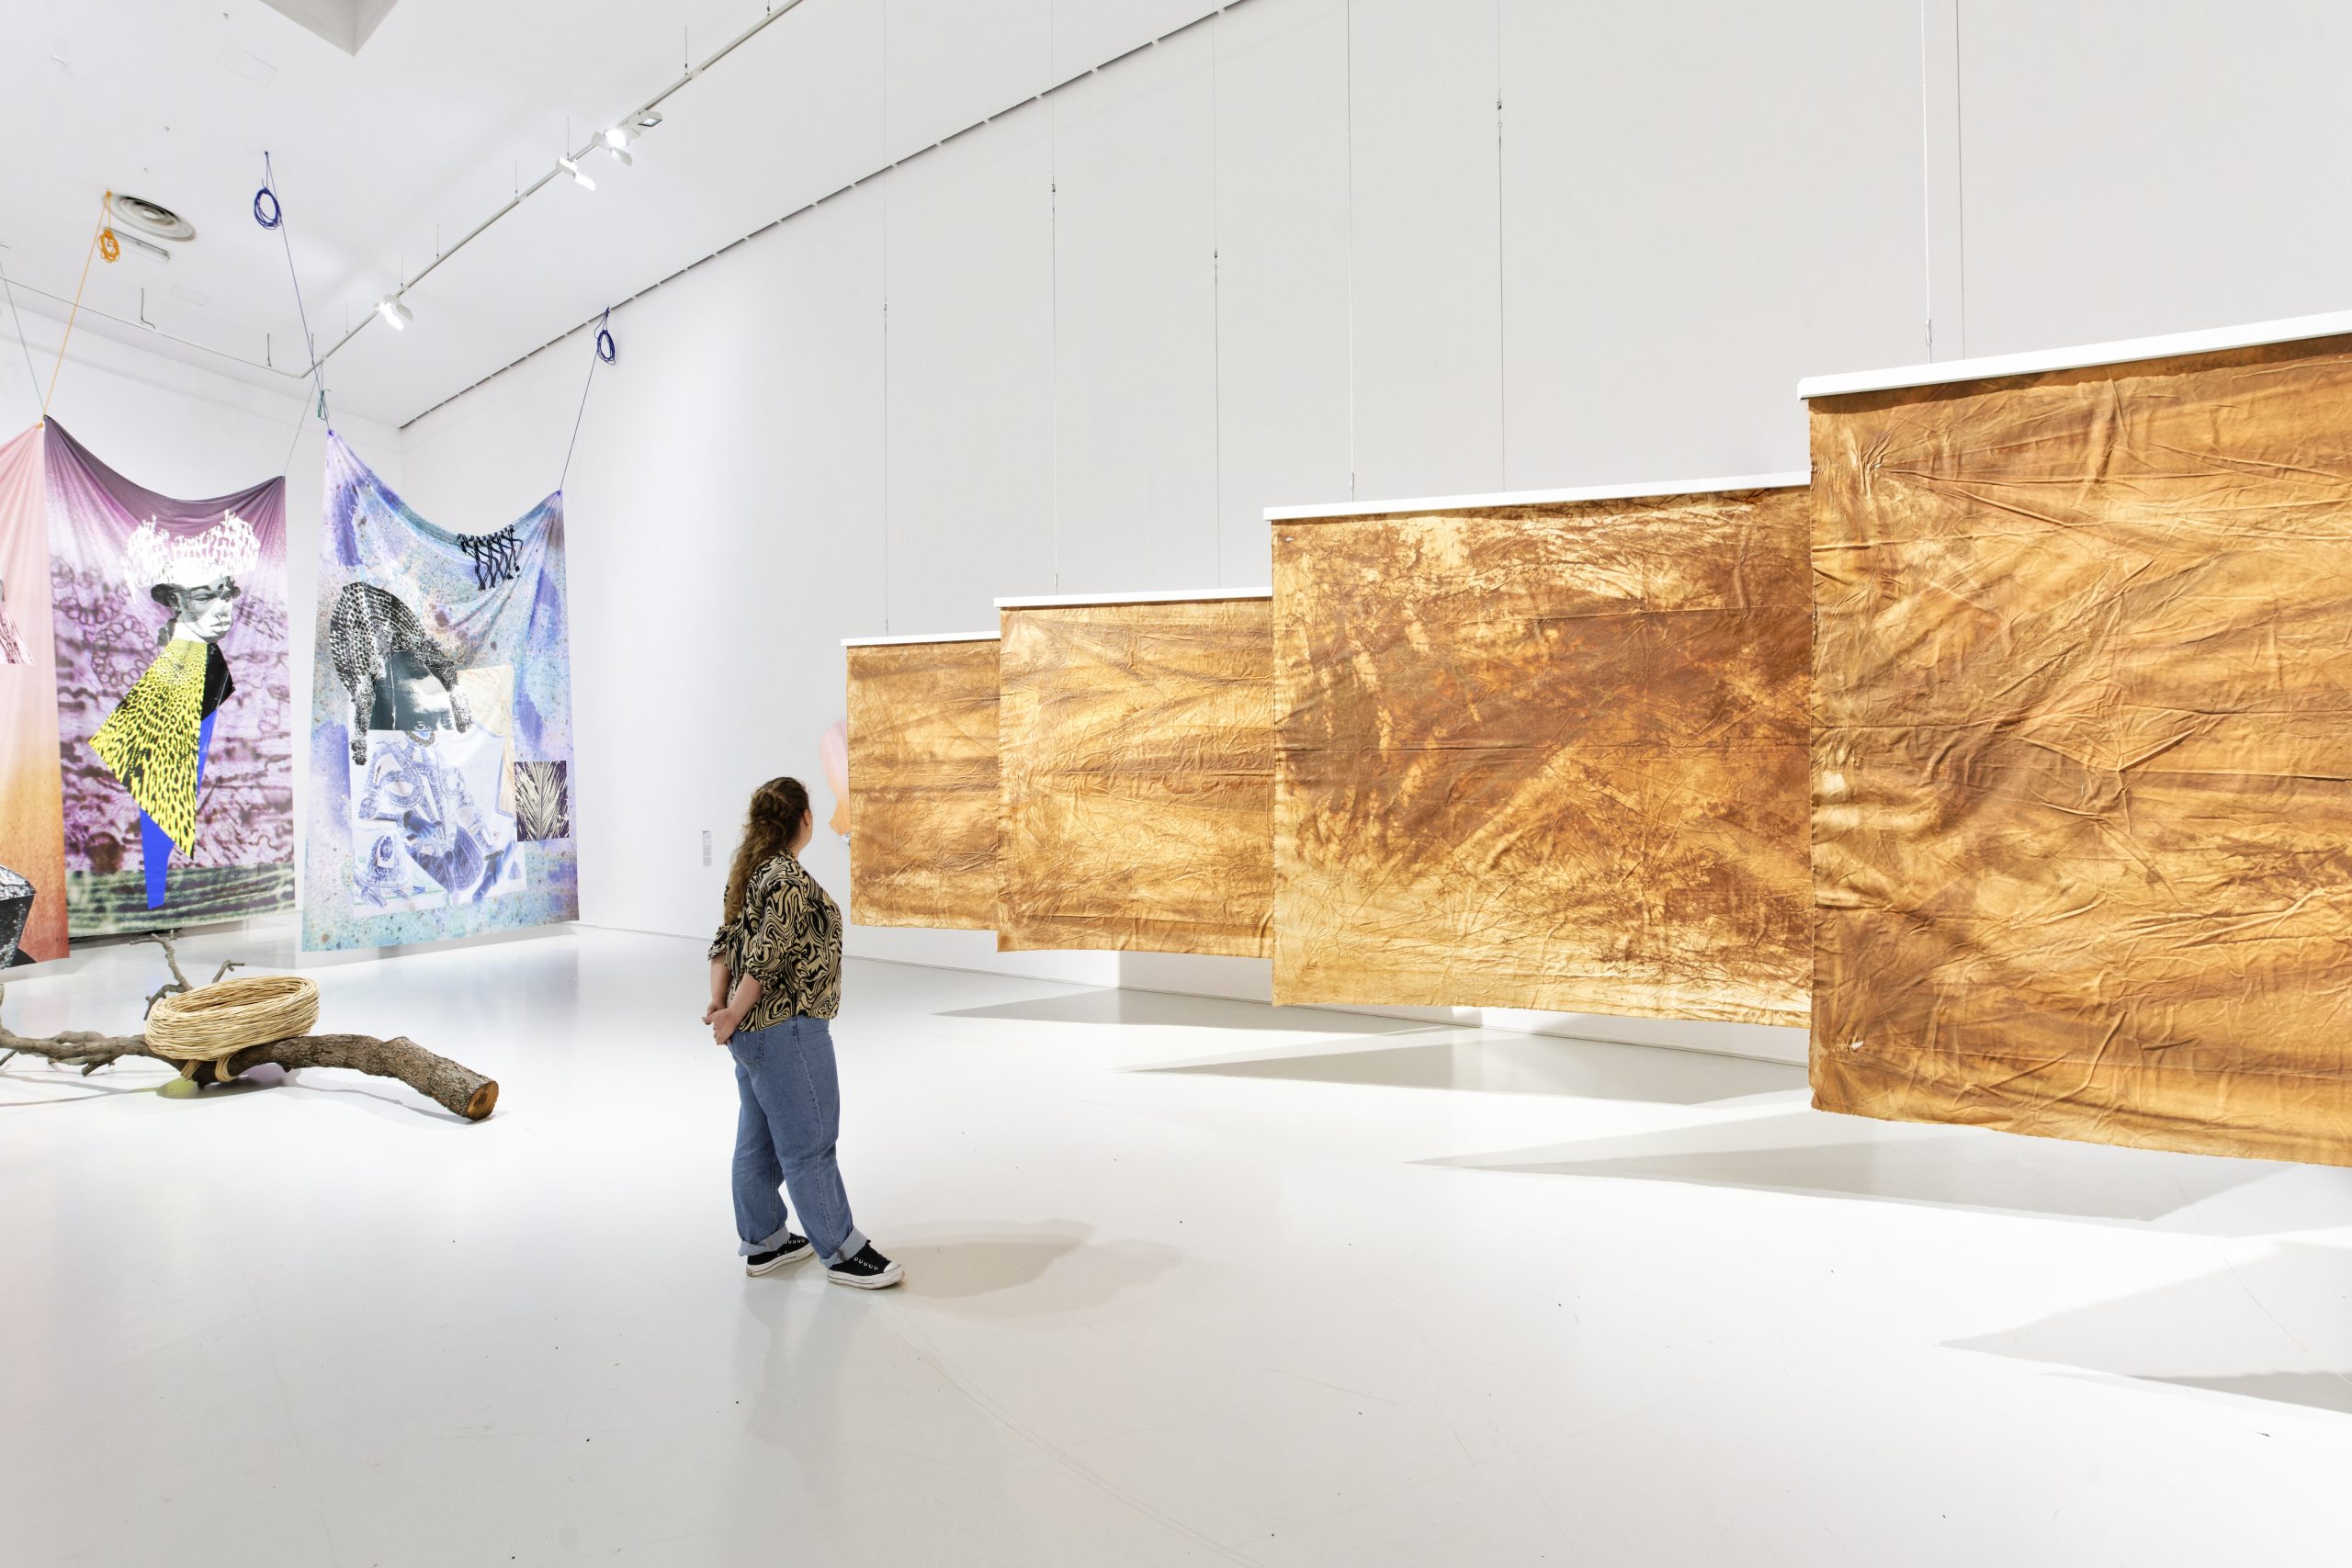 A view of different works by Porky Hefer, Raphaël Barontini and Moshekwa Langa in the exhibition Globalisto at Musée d’art moderne et contemporain de Saint-Étienne Métropole.